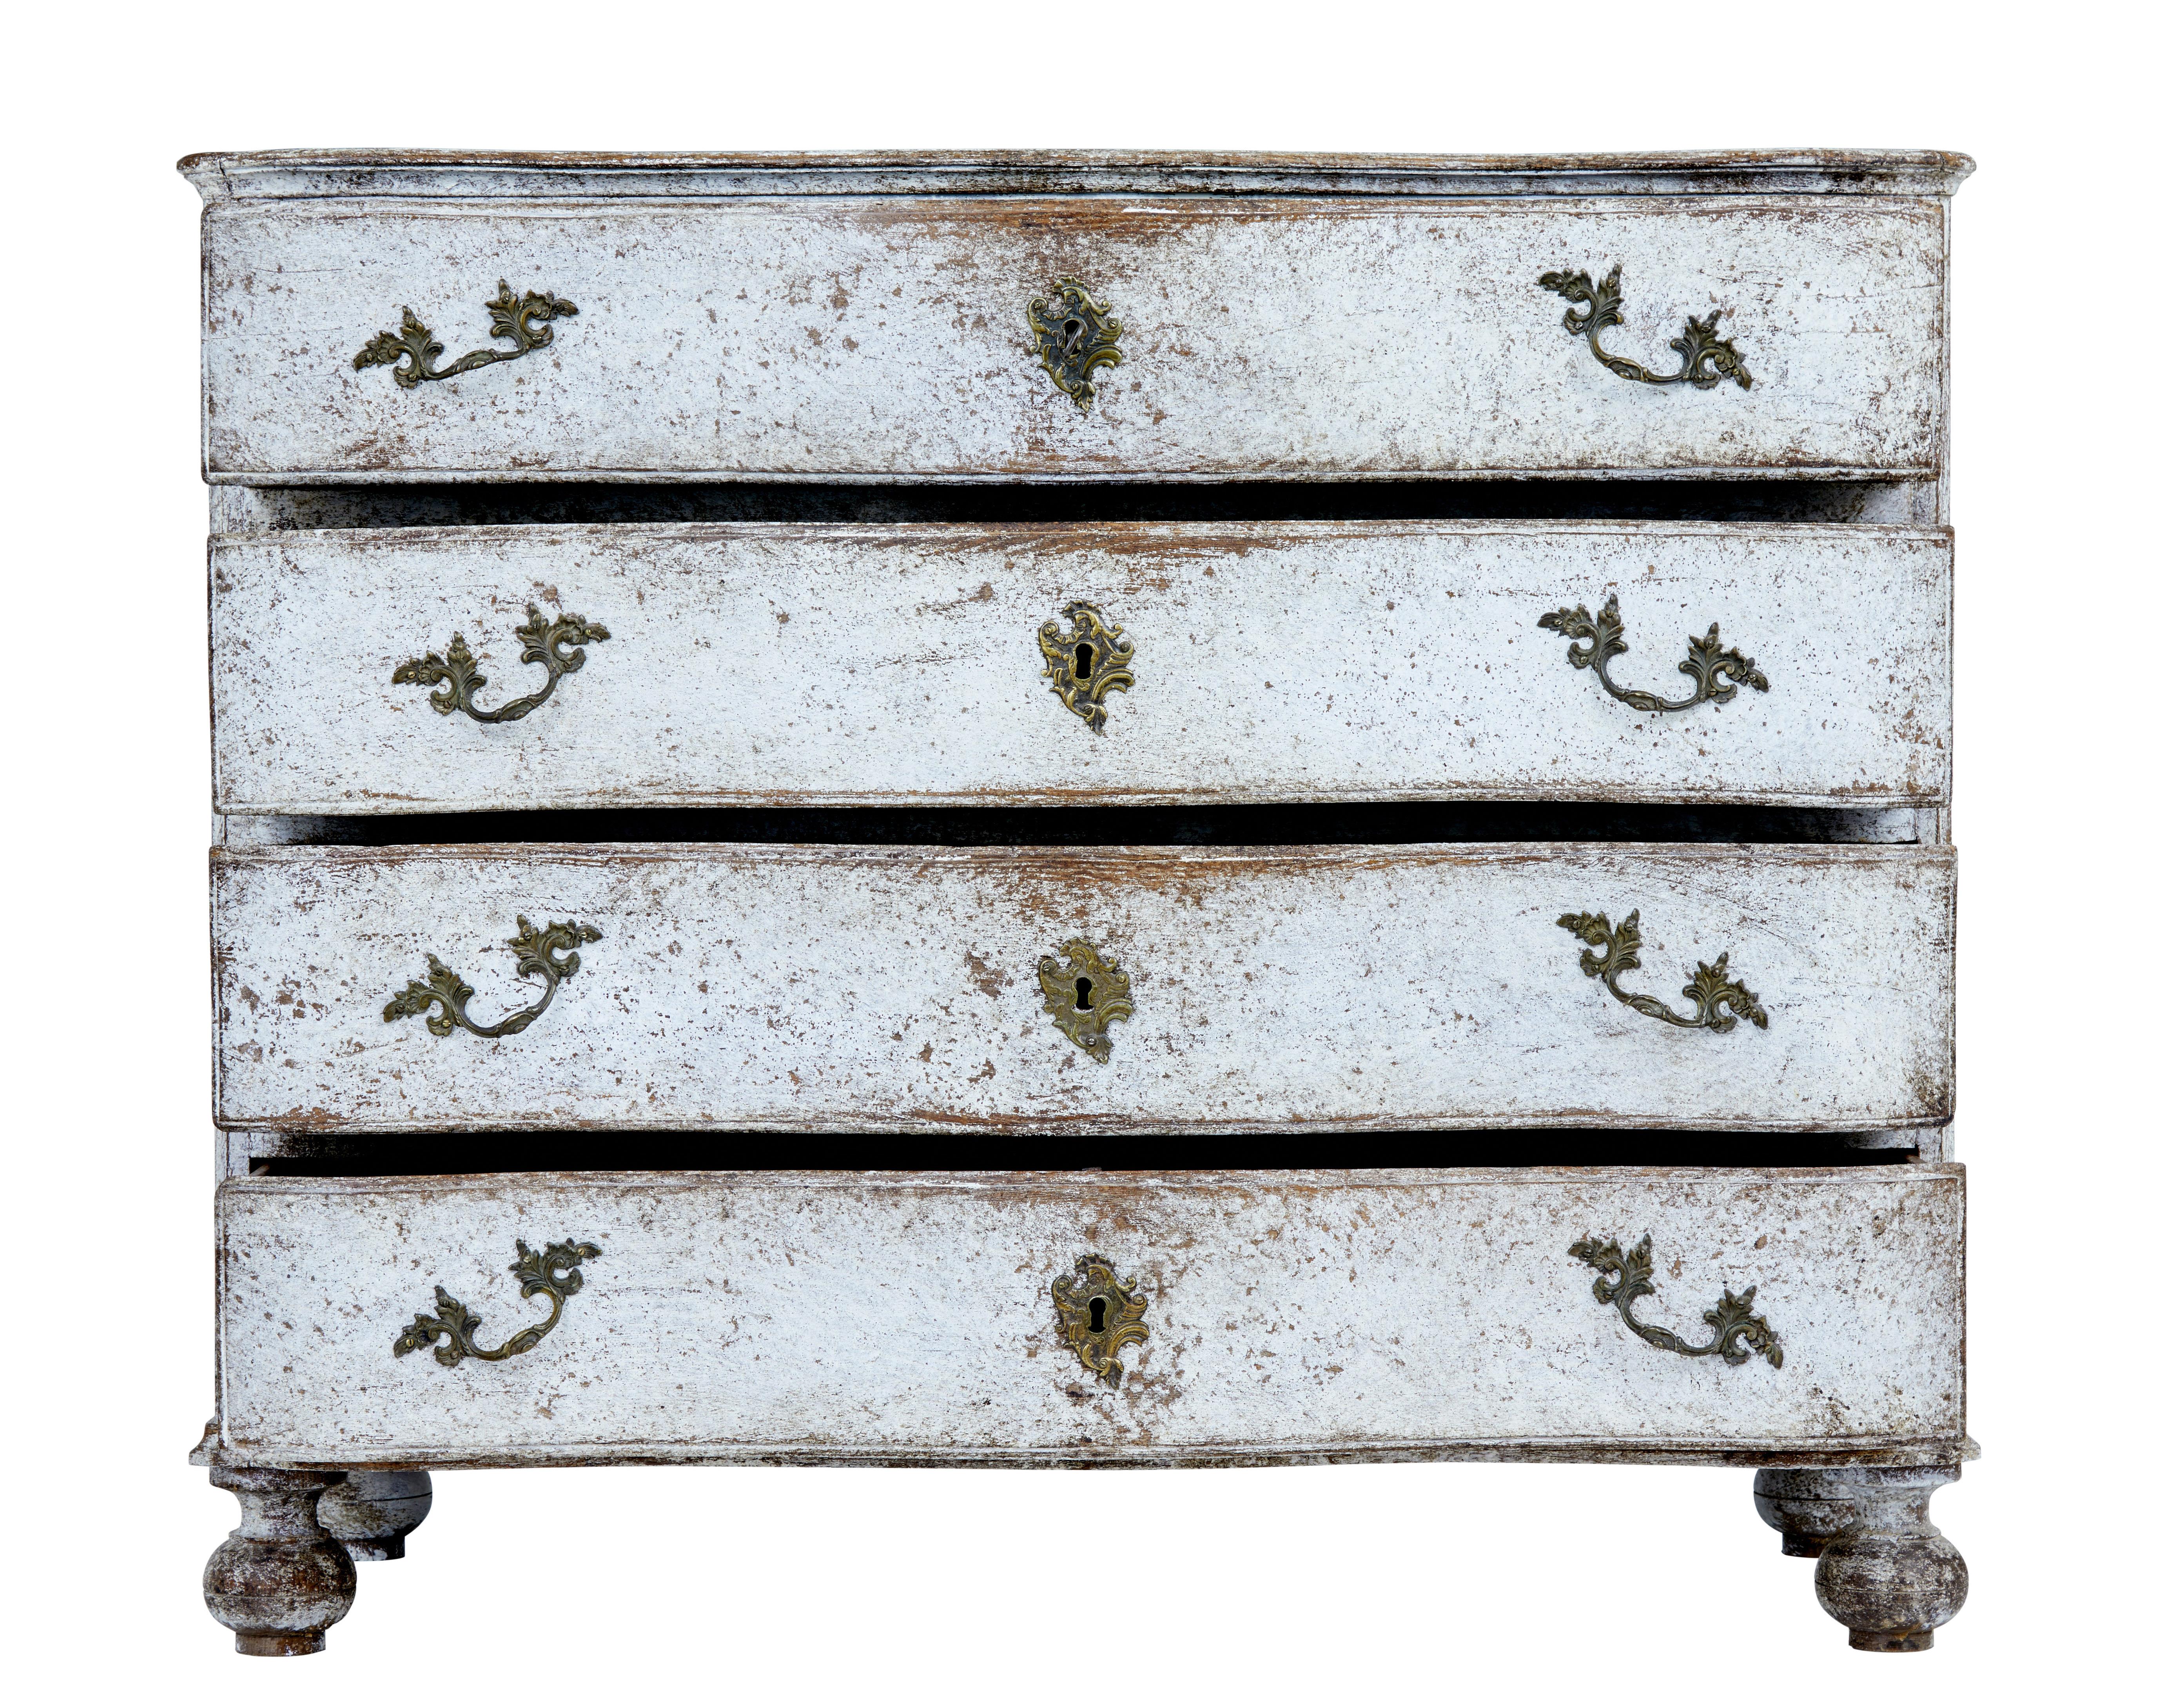 Baroque Revival 19th Century Scandinavian Painted Baroque Chest of Drawers